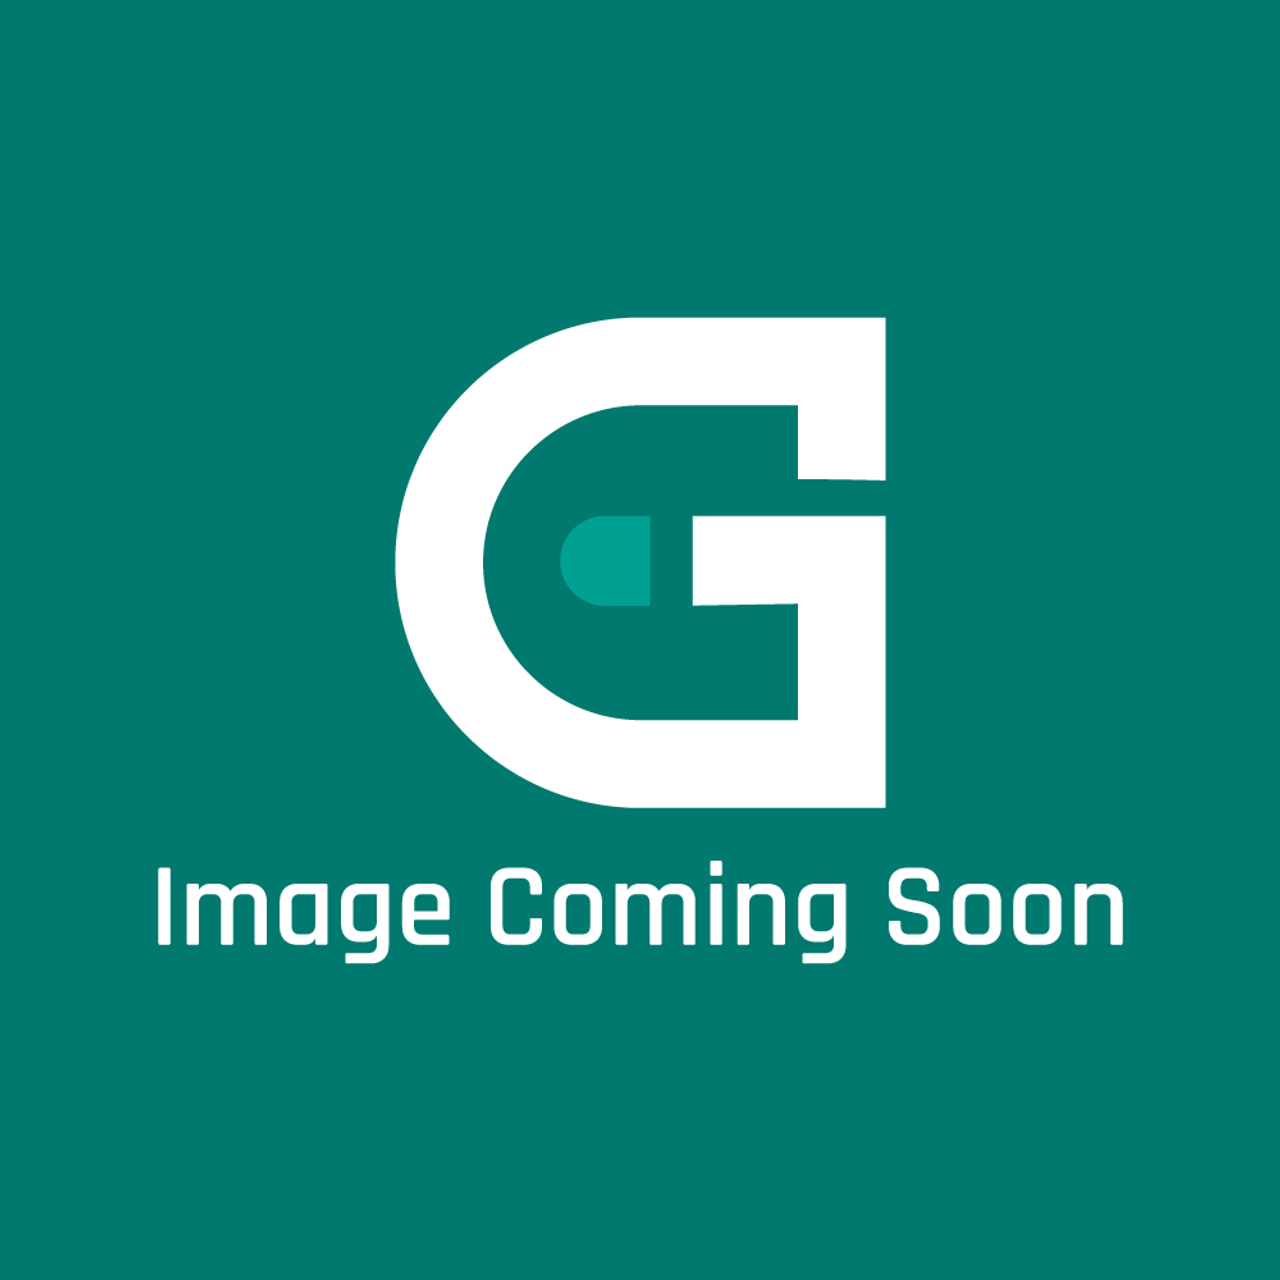 GE Appliances WJ88X26443 - Condenser - Image Coming Soon!